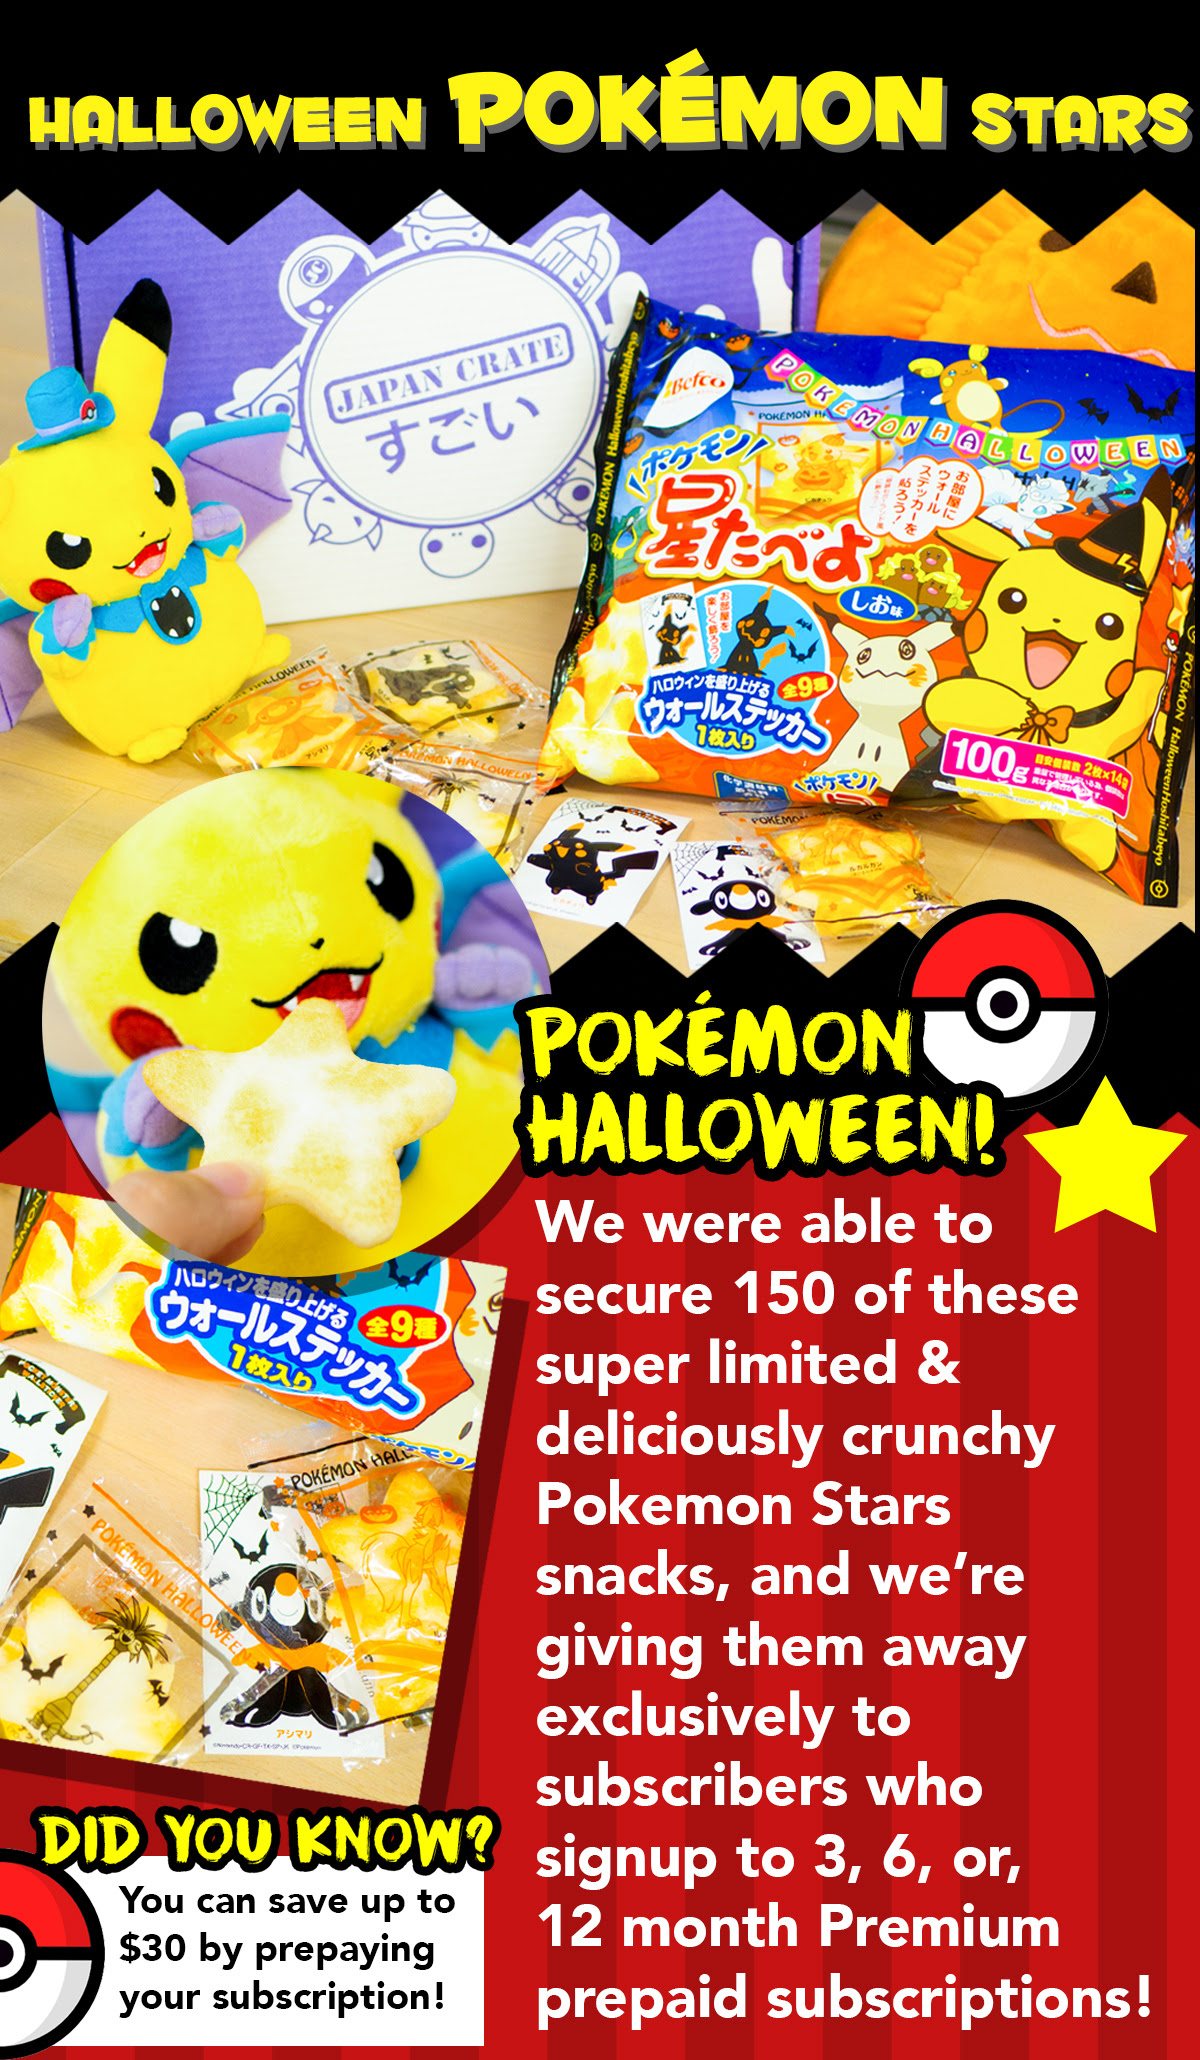 Japan Crate Coupon – FREE Pokemon Snacks with Pre-Paid Subscription!